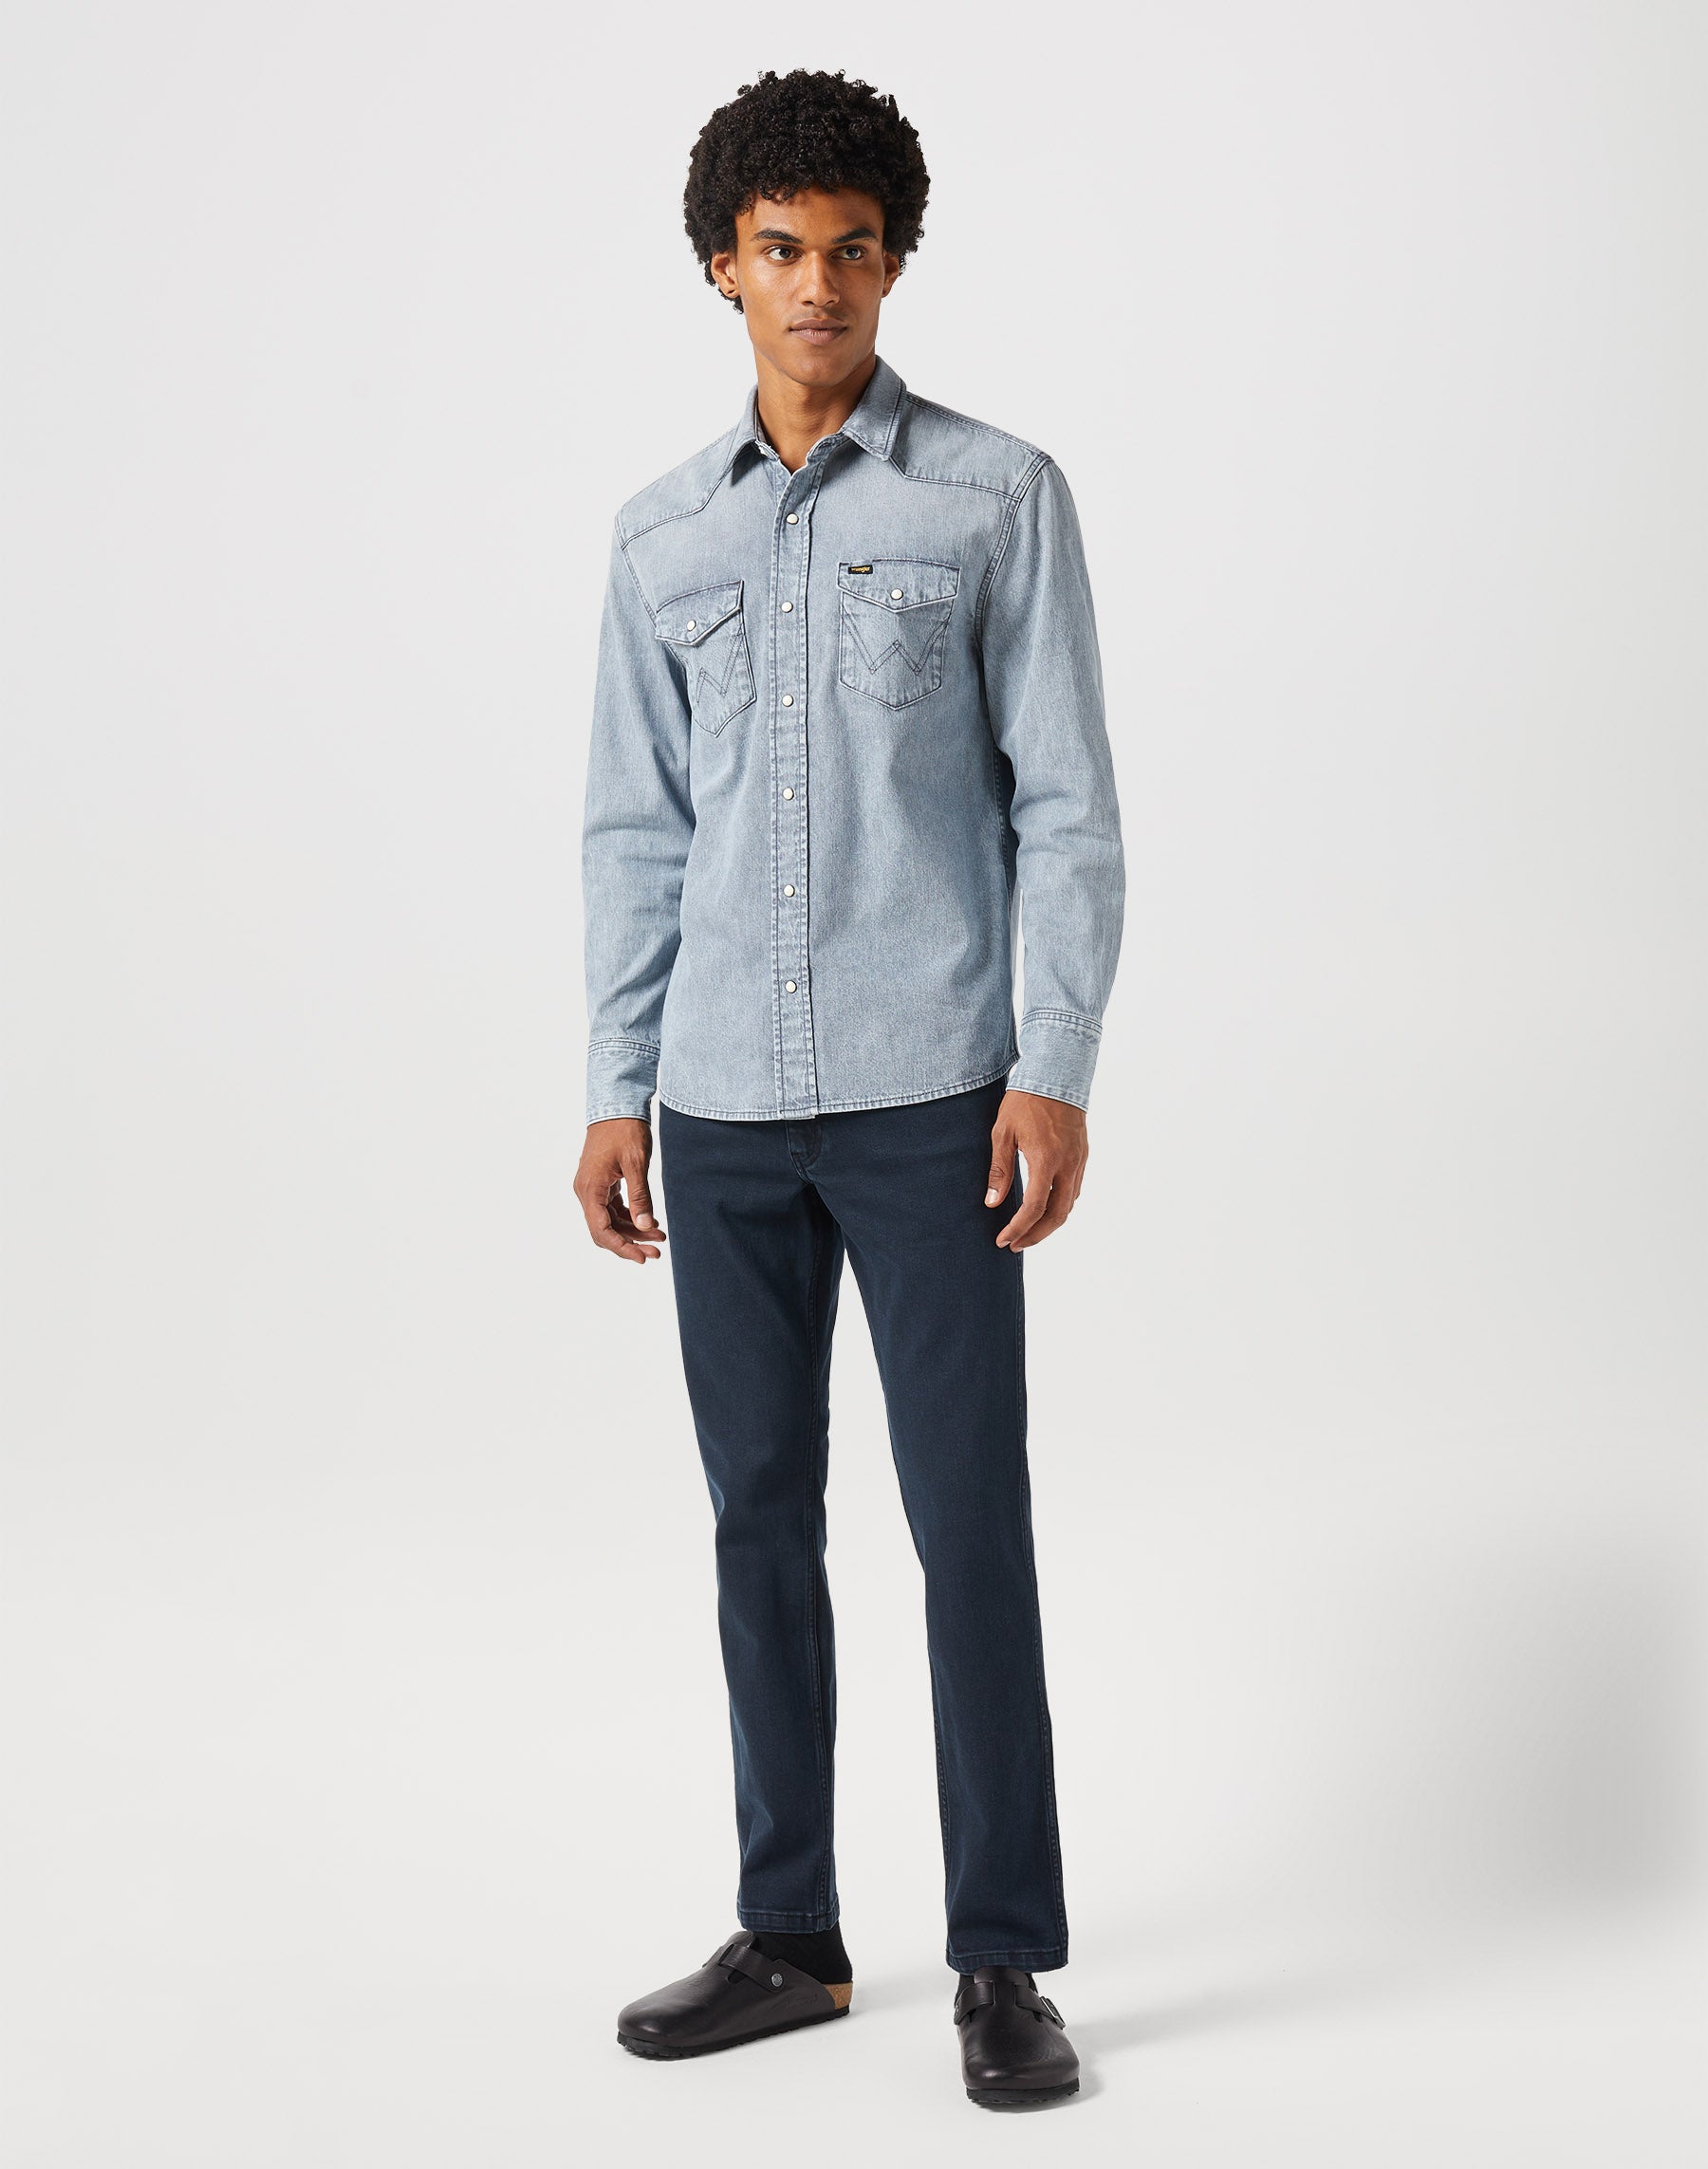 Greensboro Low Stretch in Cloudy Skies Jeans Wrangler   